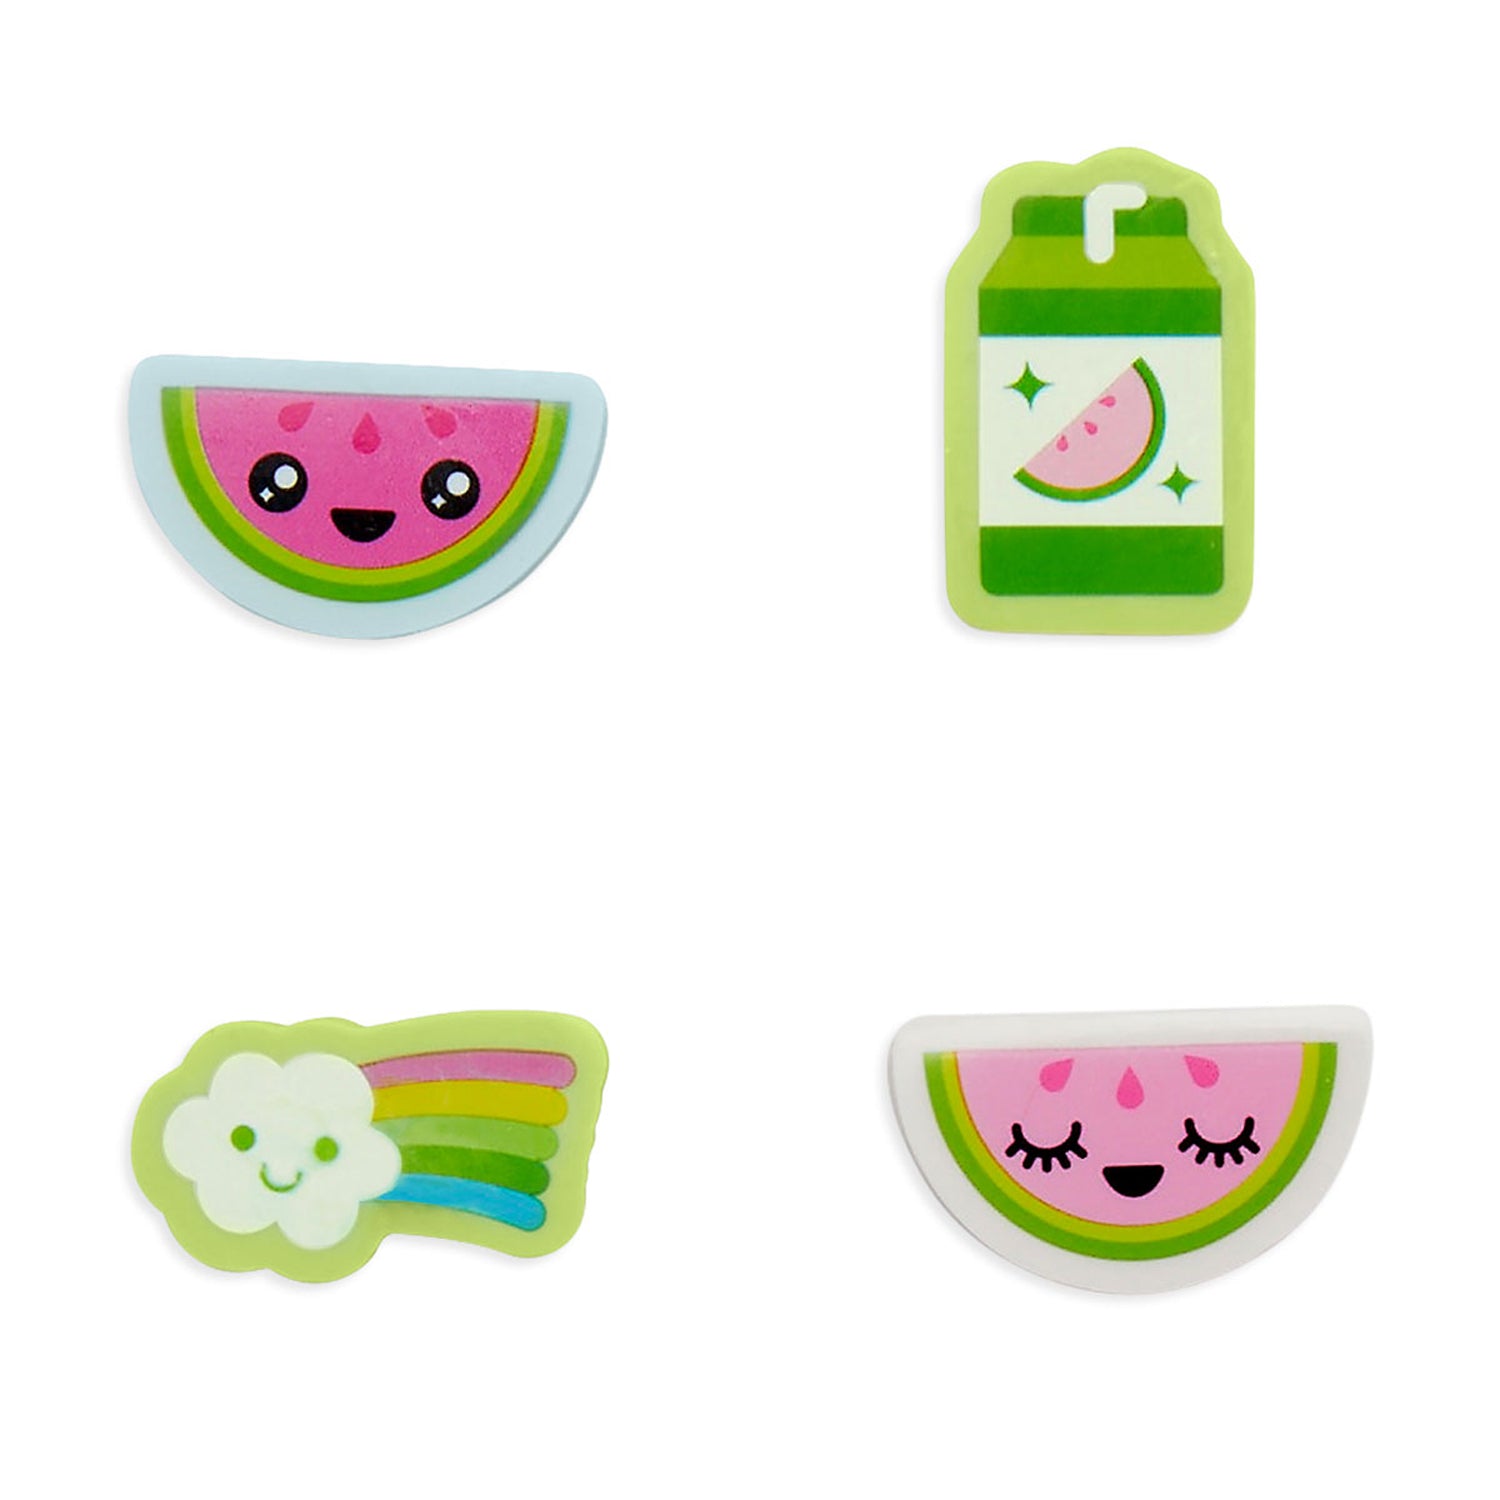 Lil' Juicy Scented Topper Eraser - Watermelon